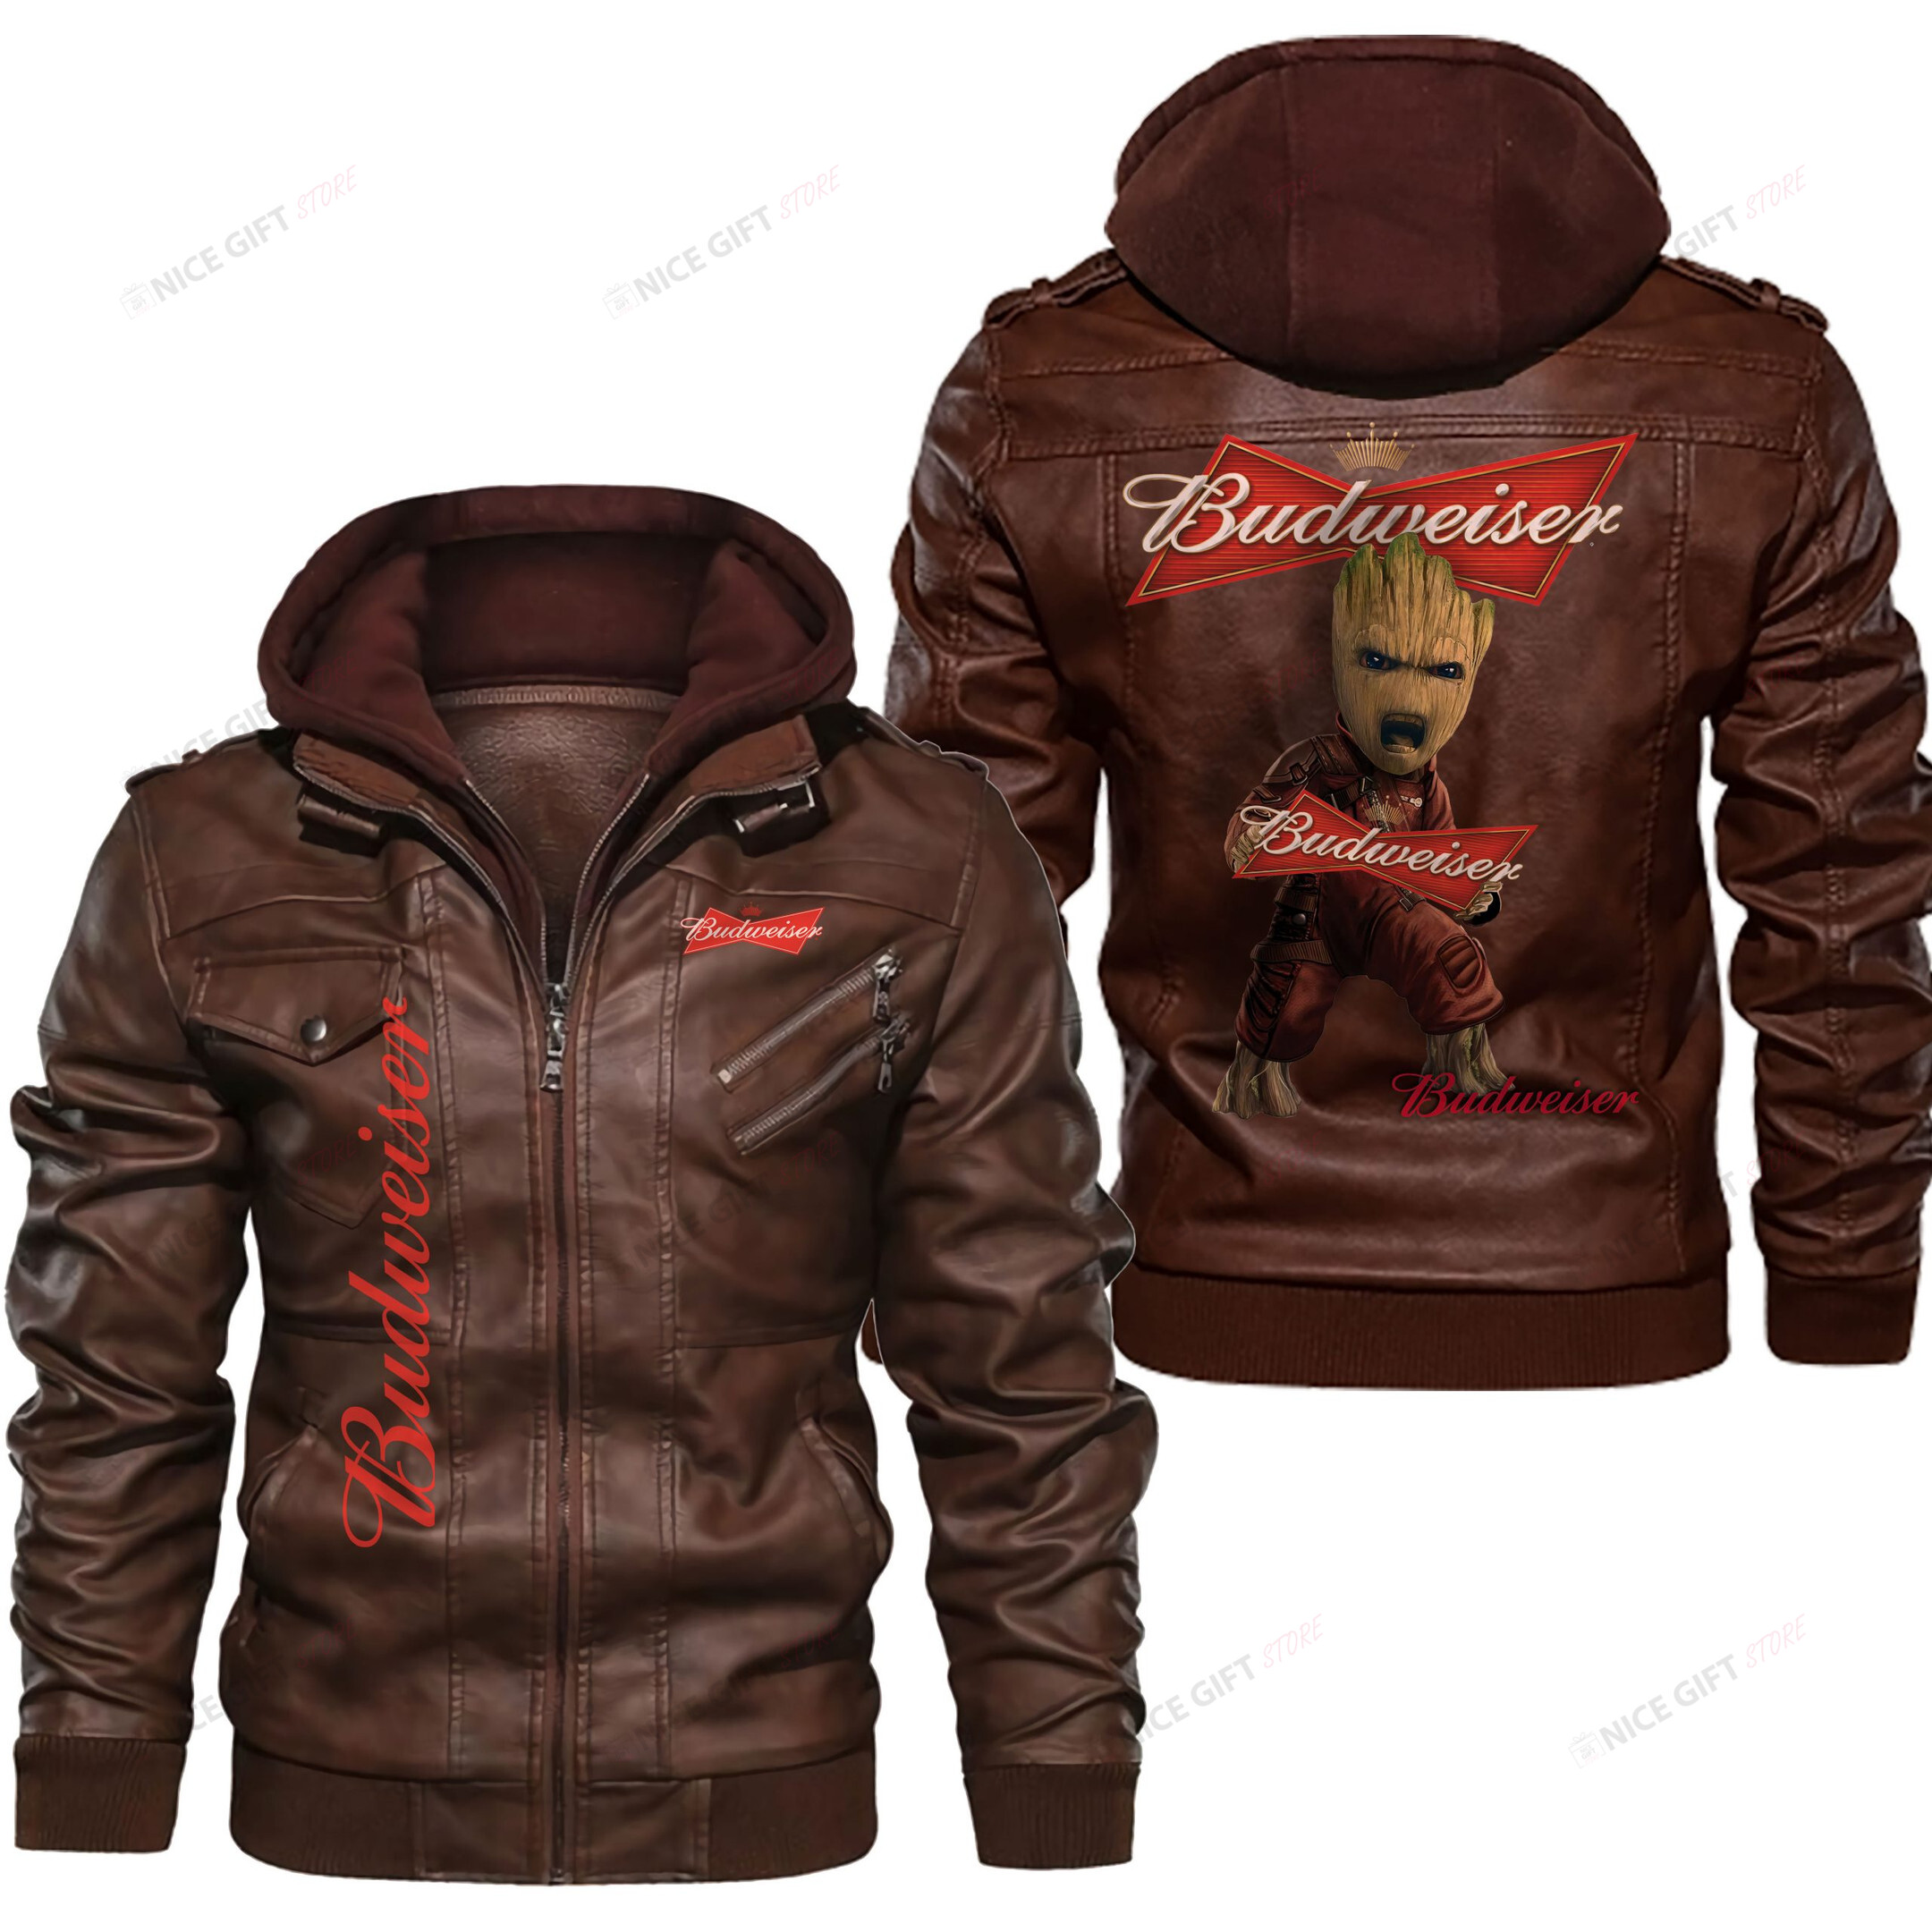 The jackets can be purchased in various colors and sizes 121